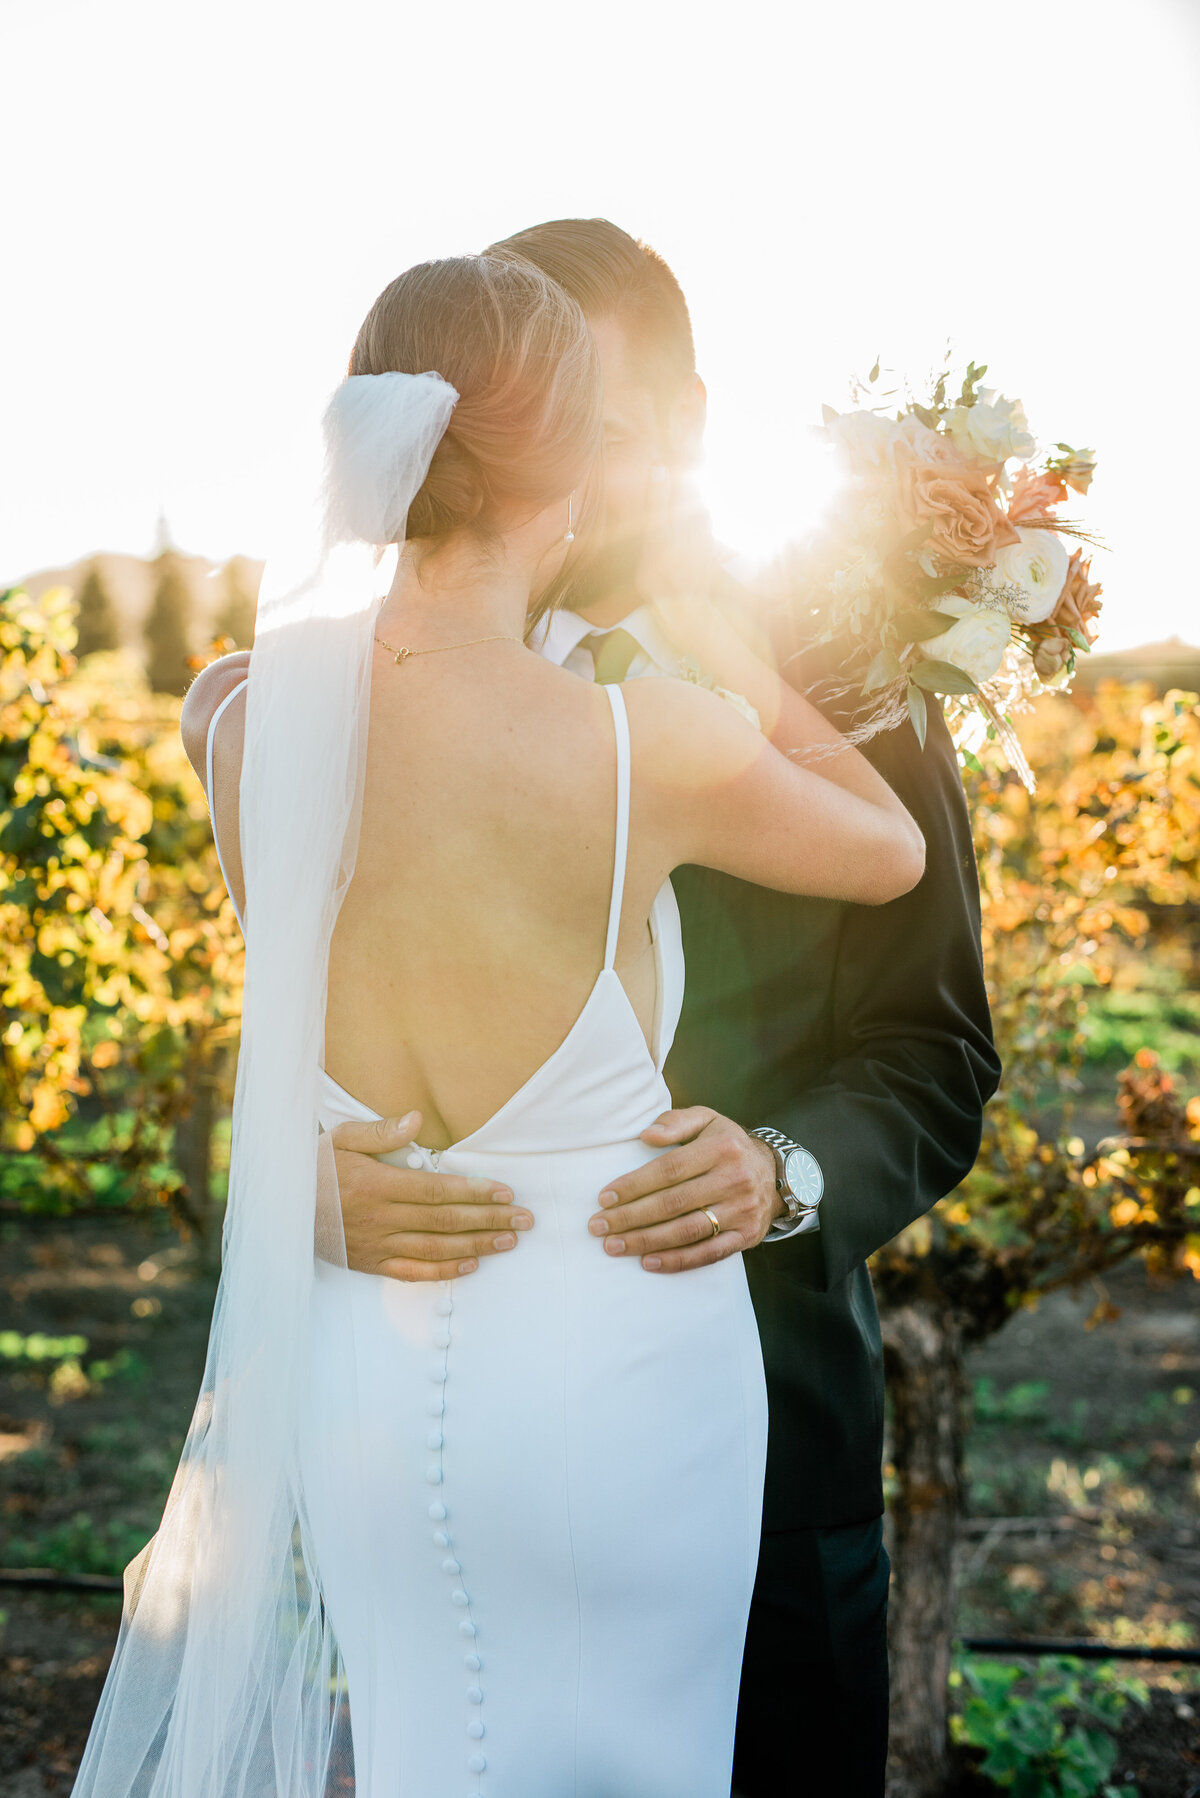 Bride and groom embrace at sunset in the vineyards during their San Luis Obispo wedding for golden hour romantic wedding photos.